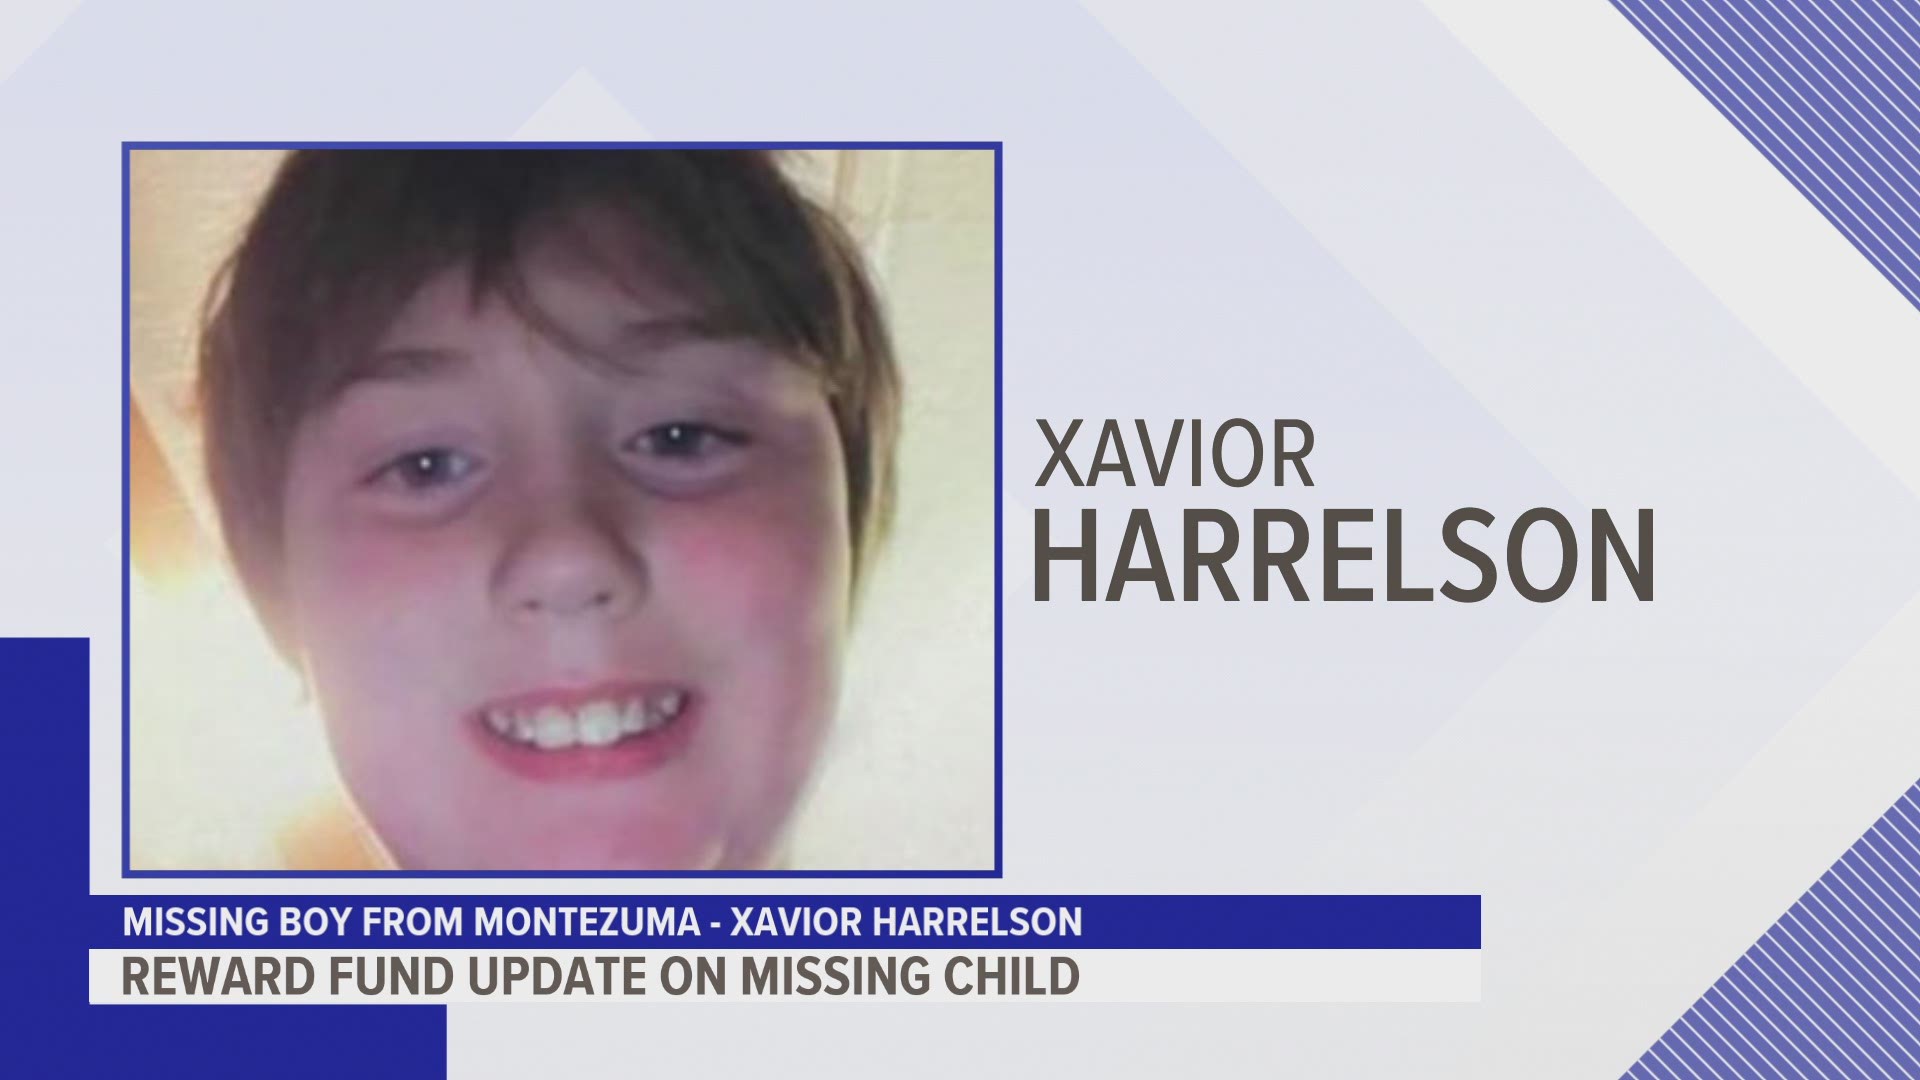 The 11-year-old Montezuma boy has been missing since May 27, according to the Poweshiek County Sheriff's Office.